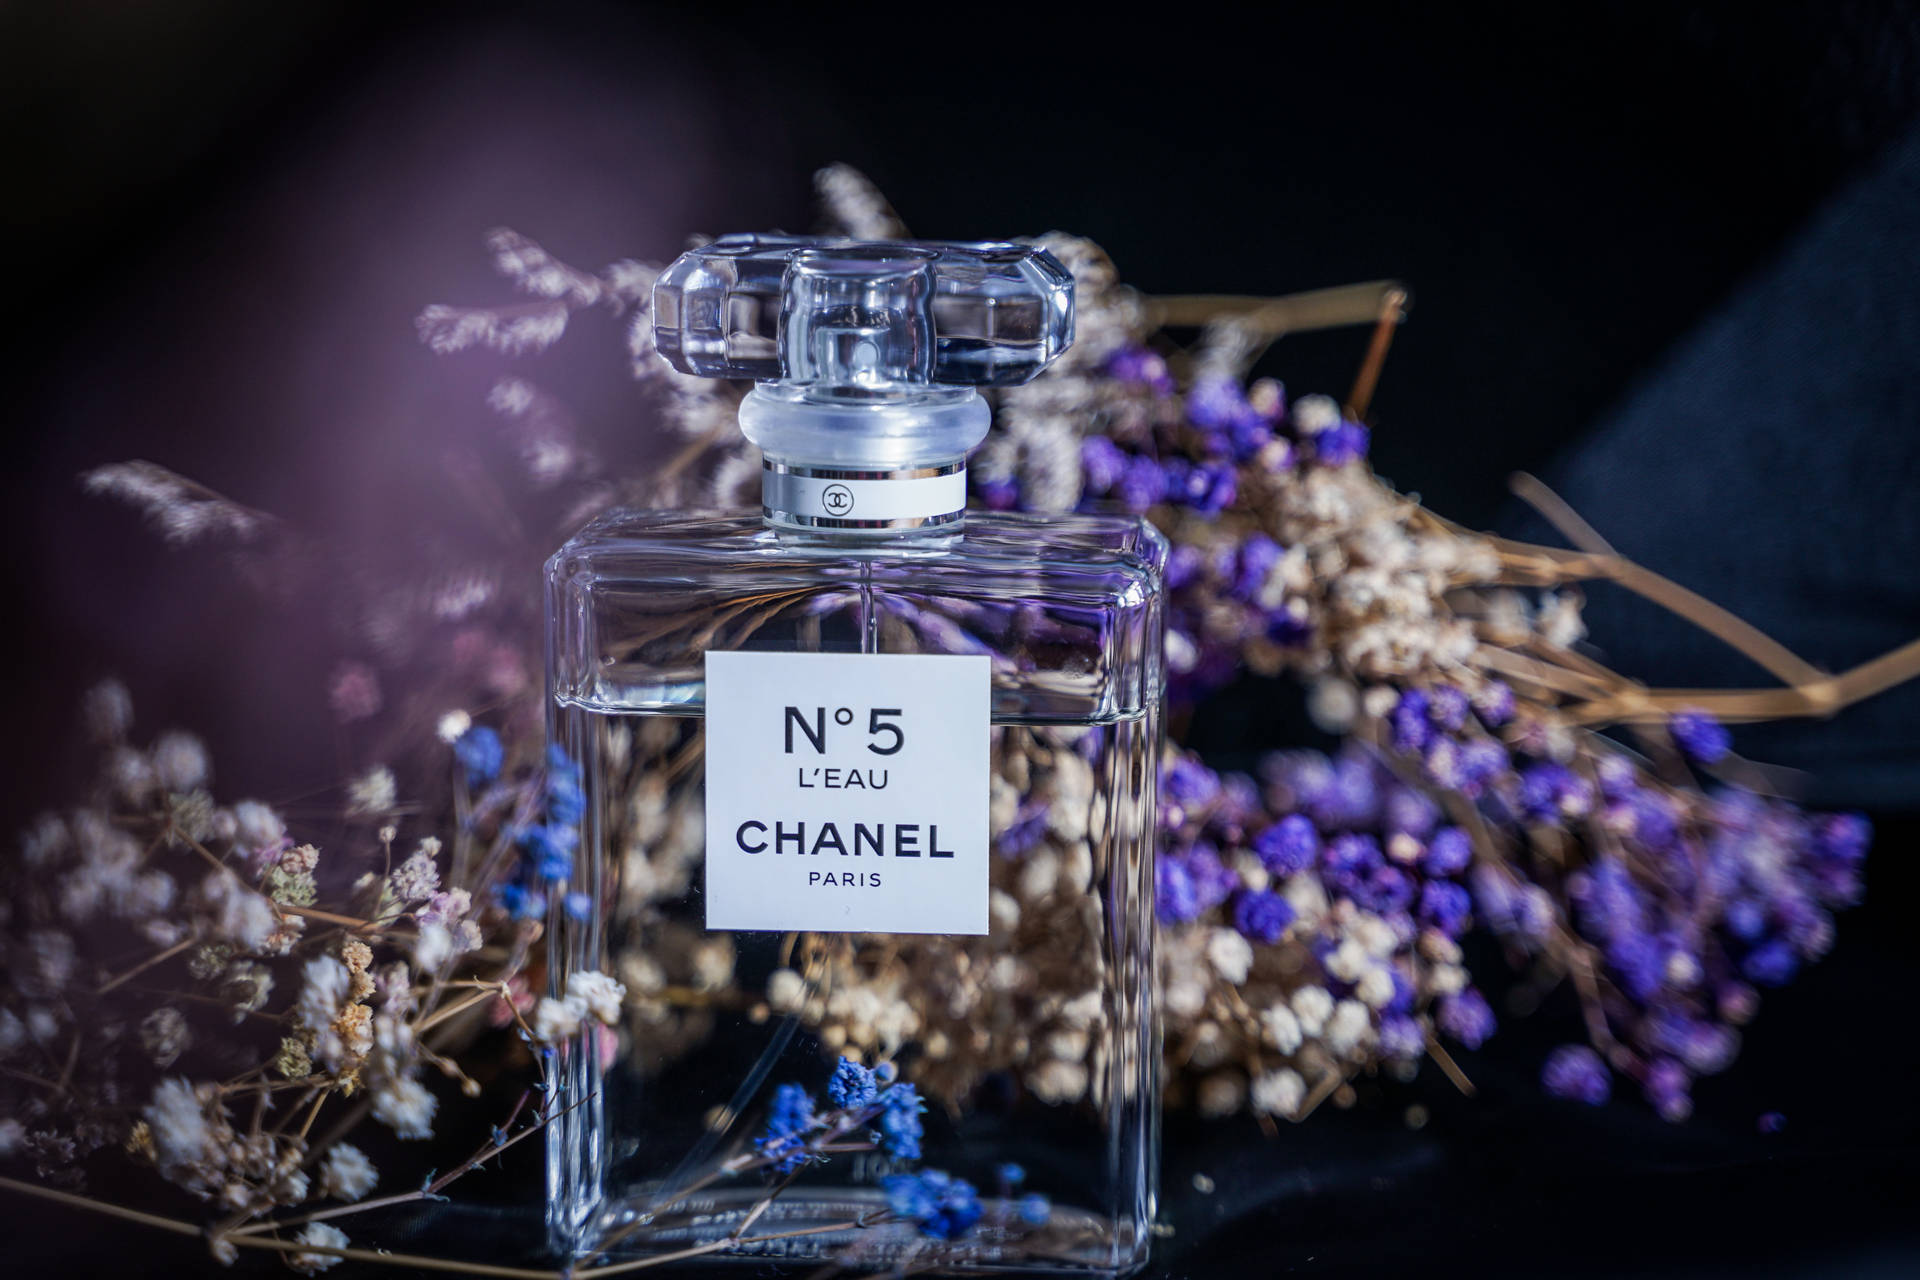 Chanel No. 5 L'eau With Flowers Background